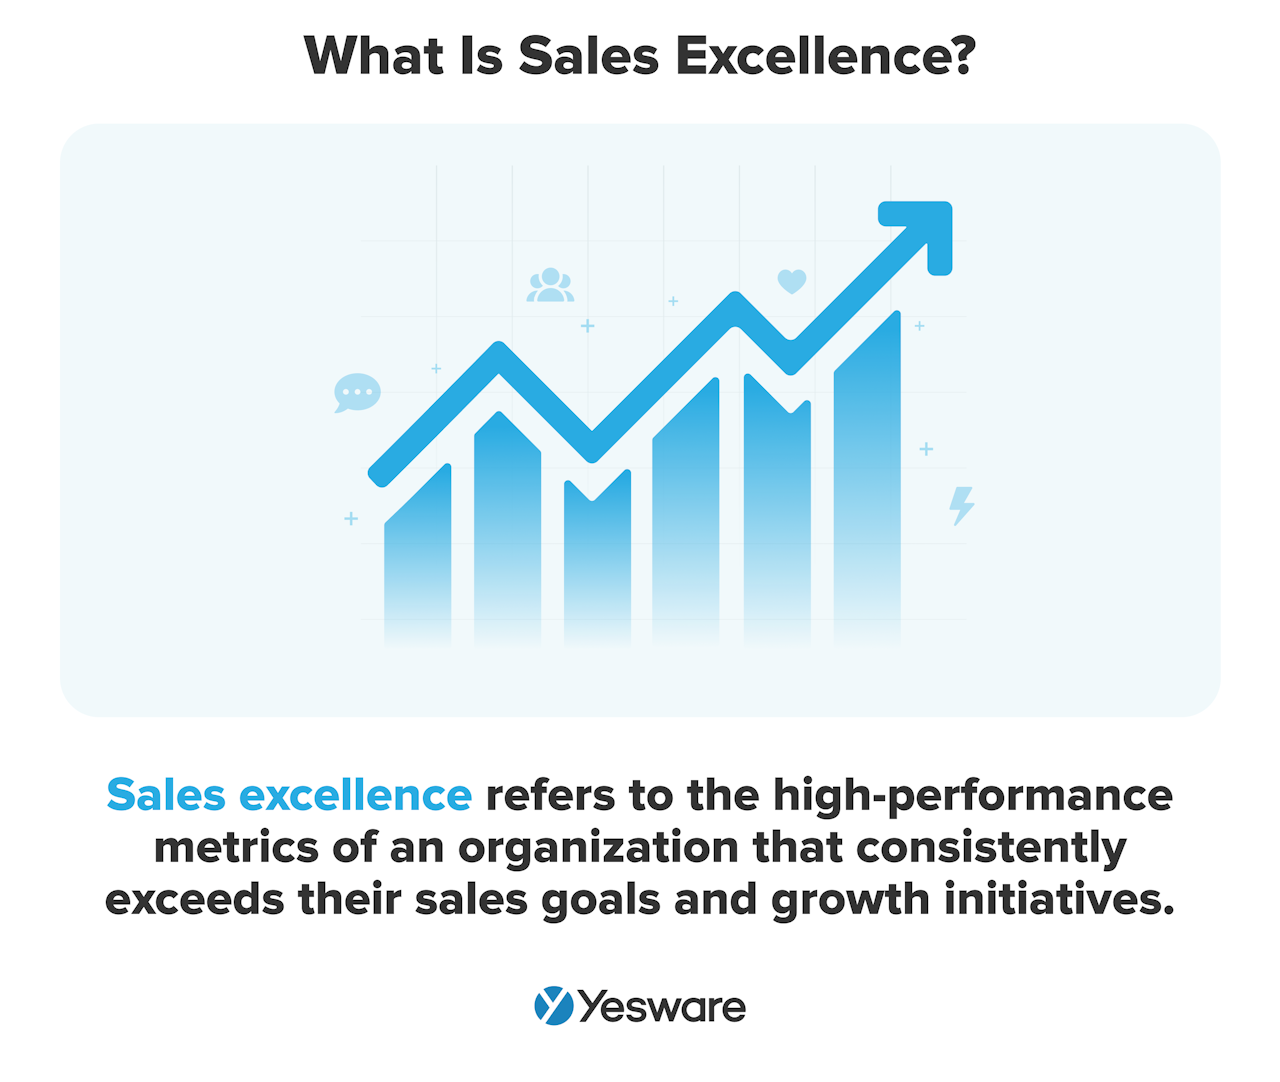 What is sales excellence?